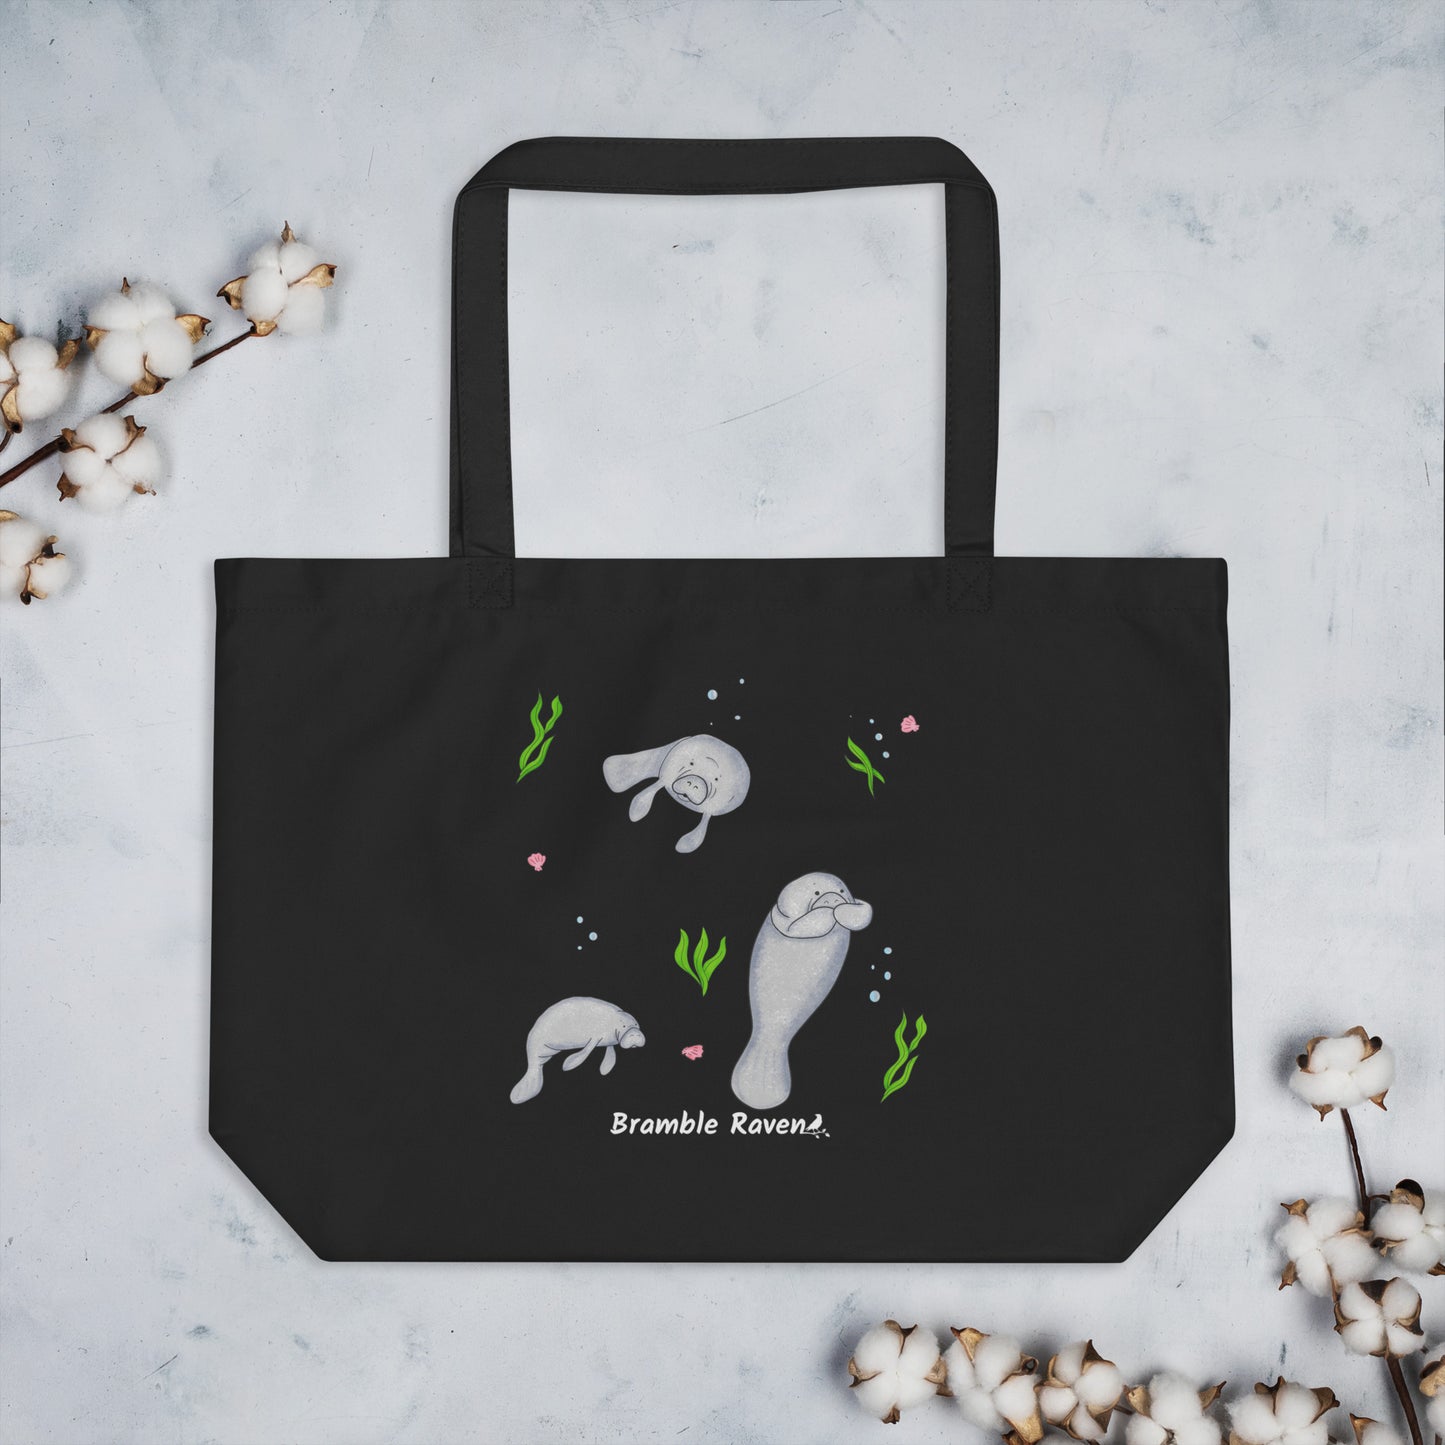 20″ × 14″ × 5″ 100% organic cotton tote bag. Features three manatees with accents of seashells, seaweed, and bubbles. Black fabric with dual handles. Shown on table with sprigs of cotton.